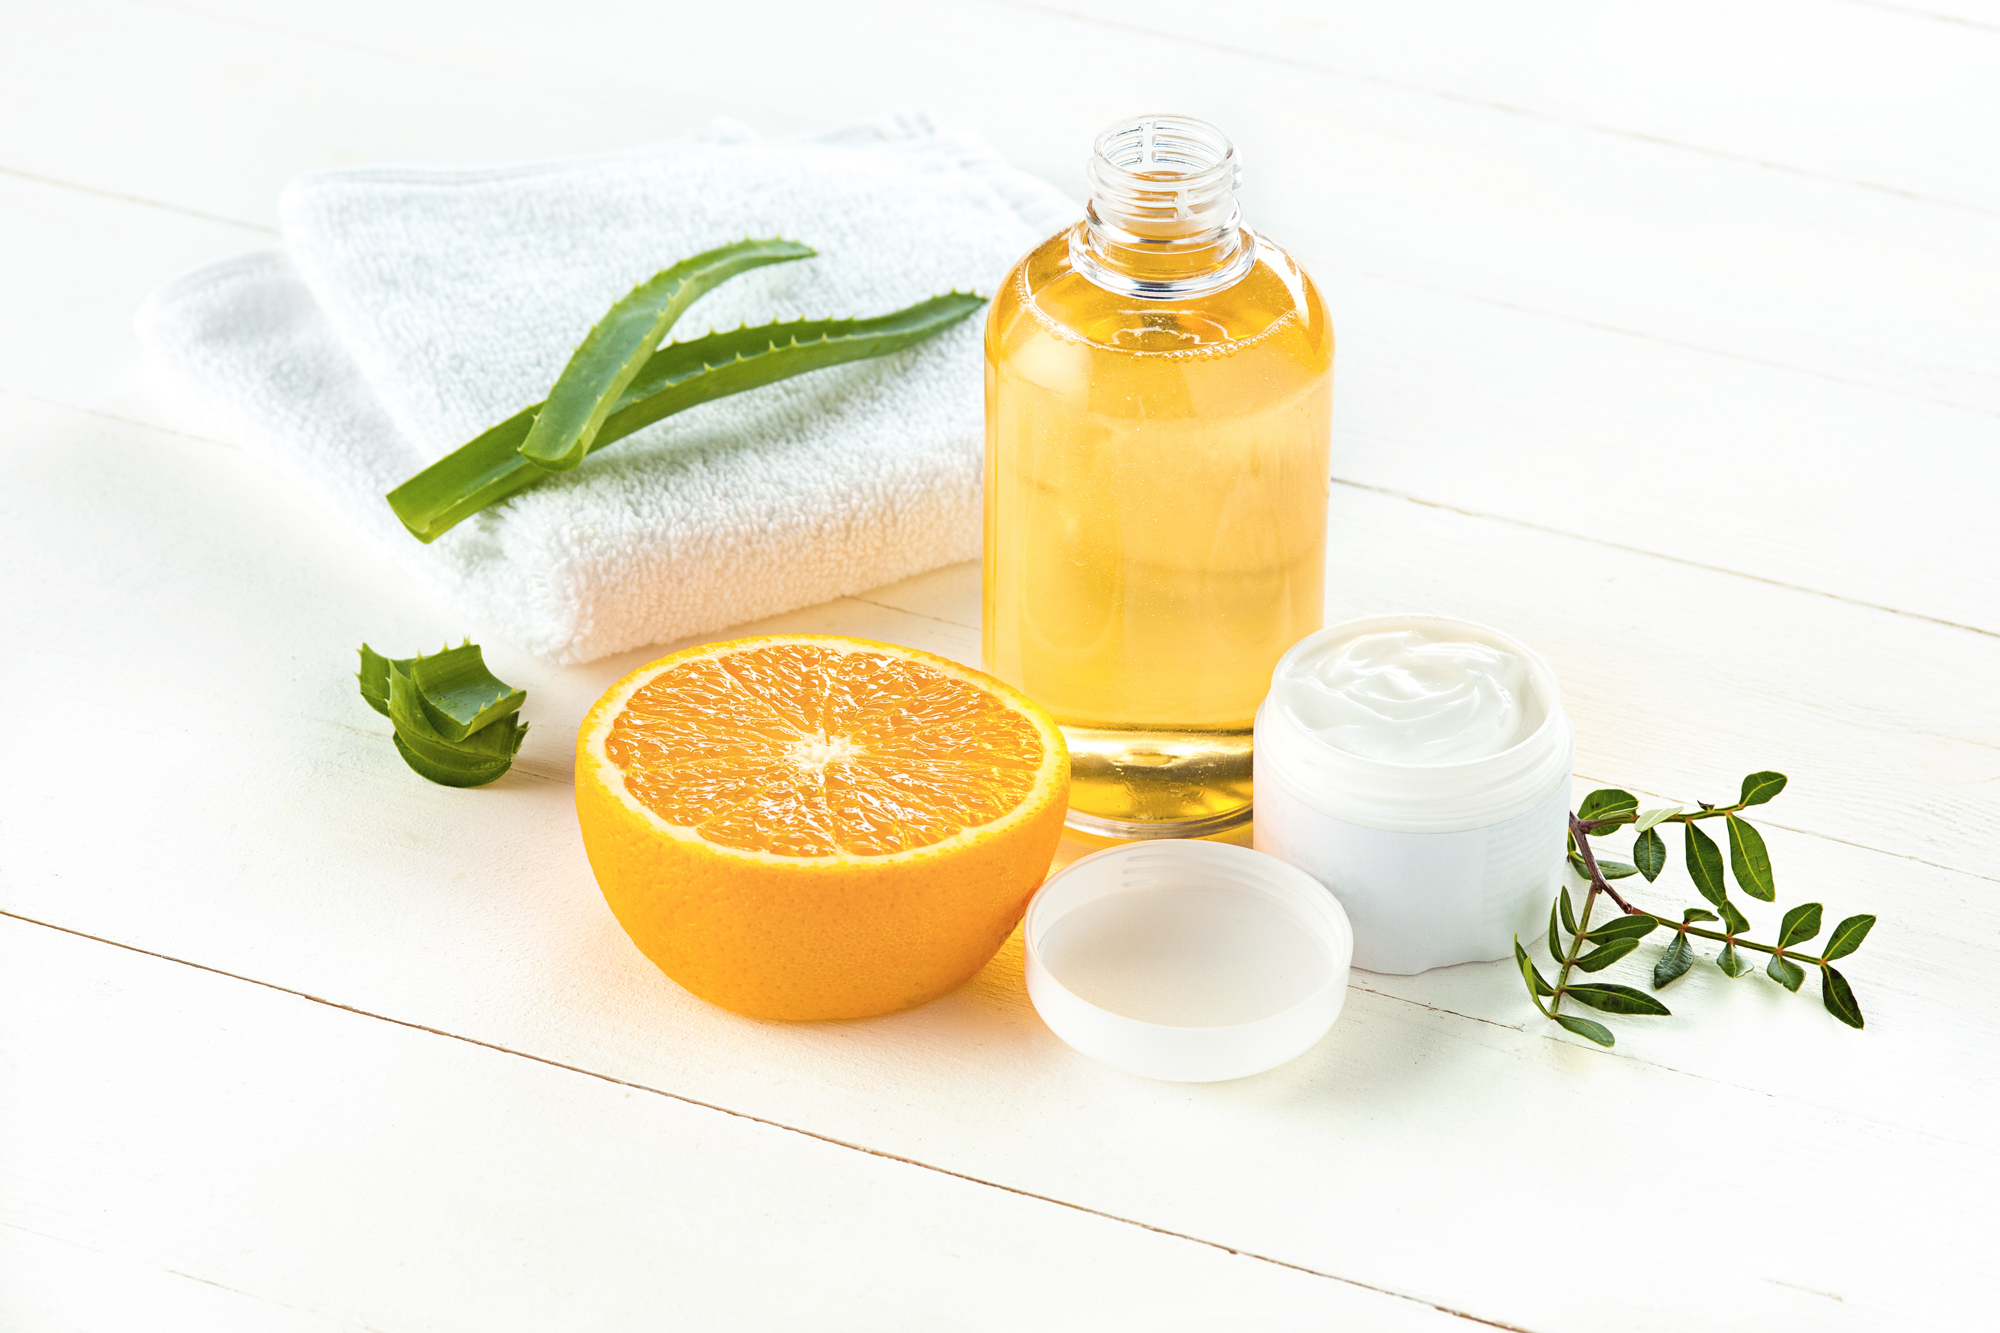 When Buying Pores And Skin Care Products, Search For The Following Ingredients: